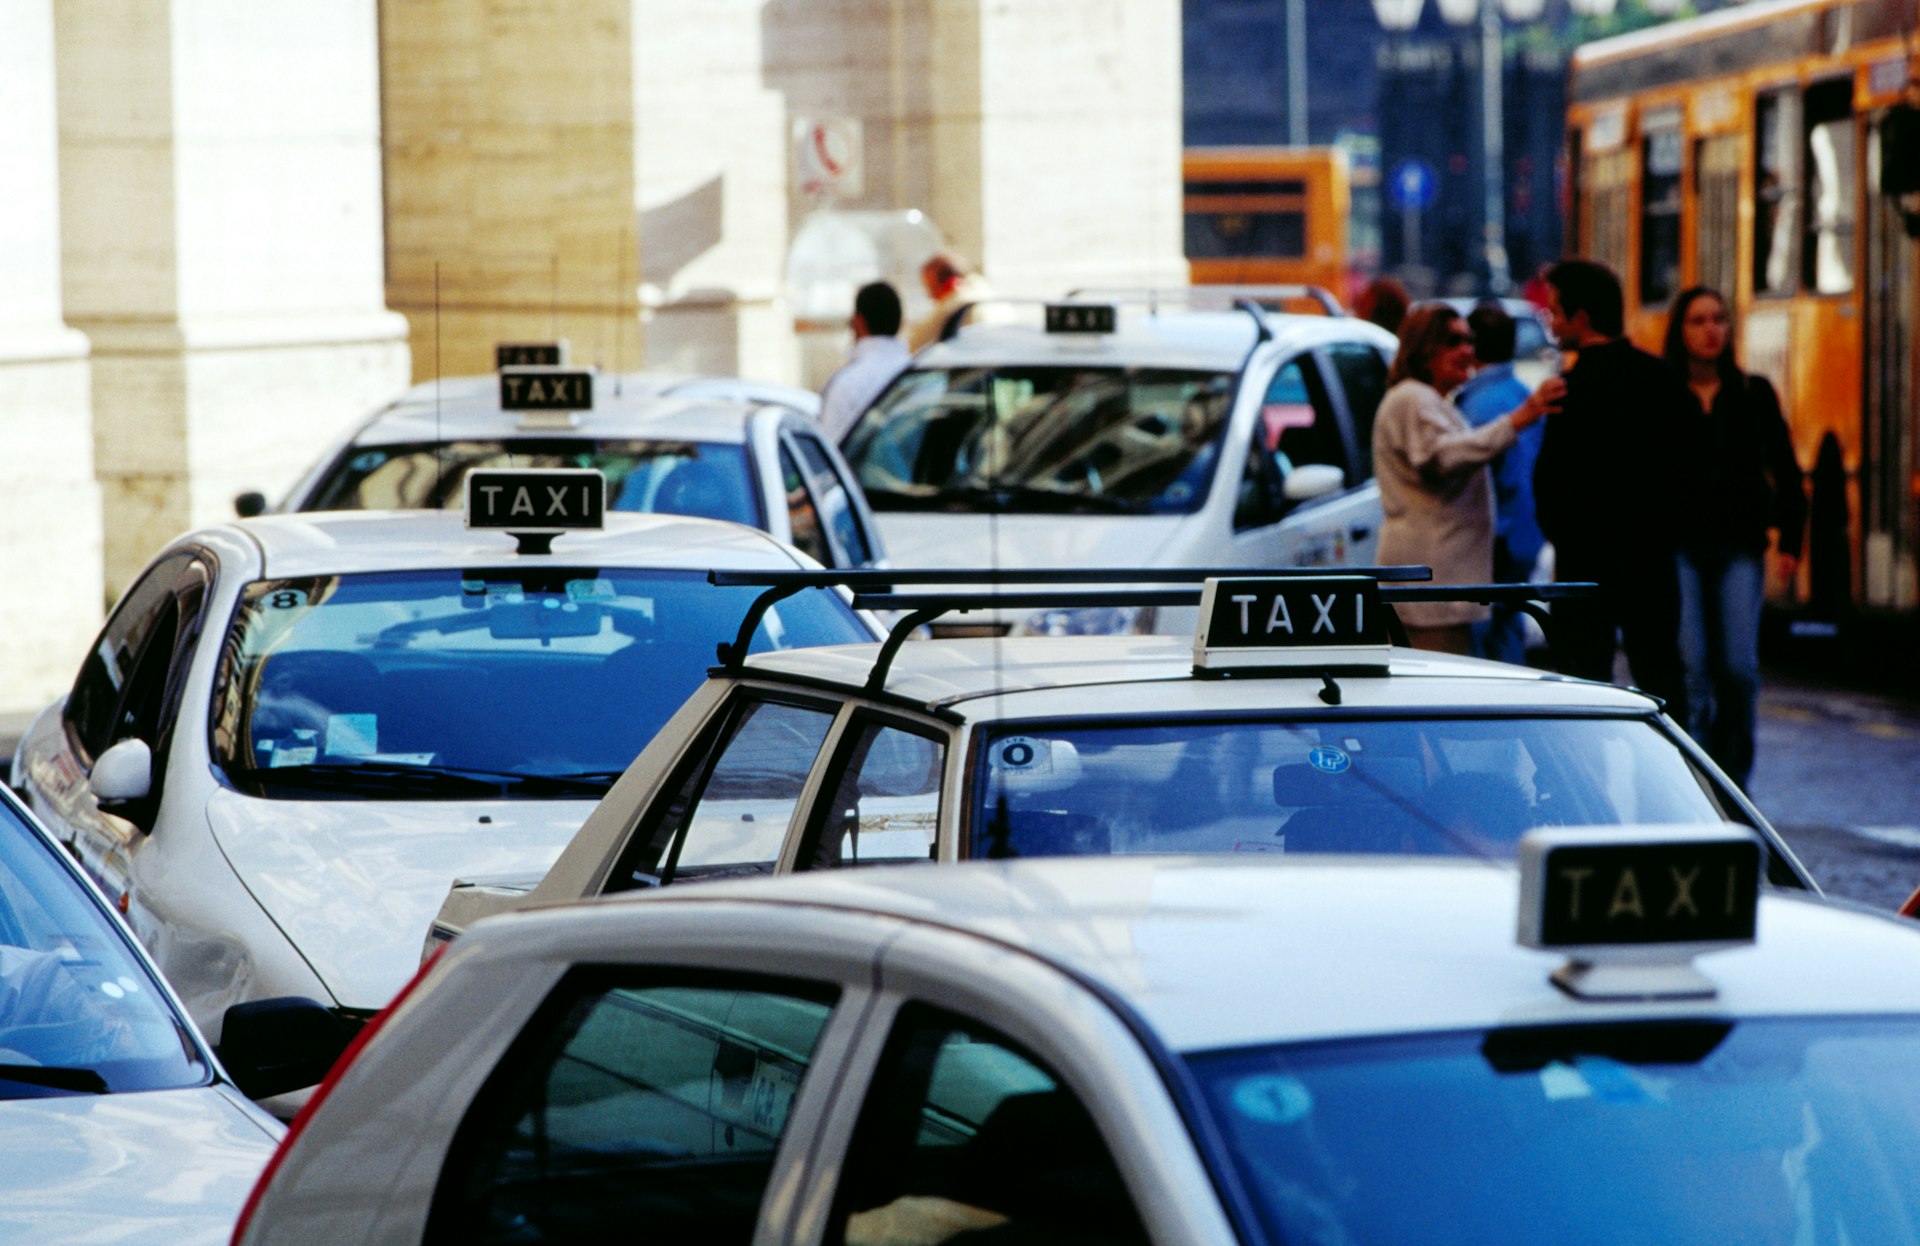 Taxi stand in Naples